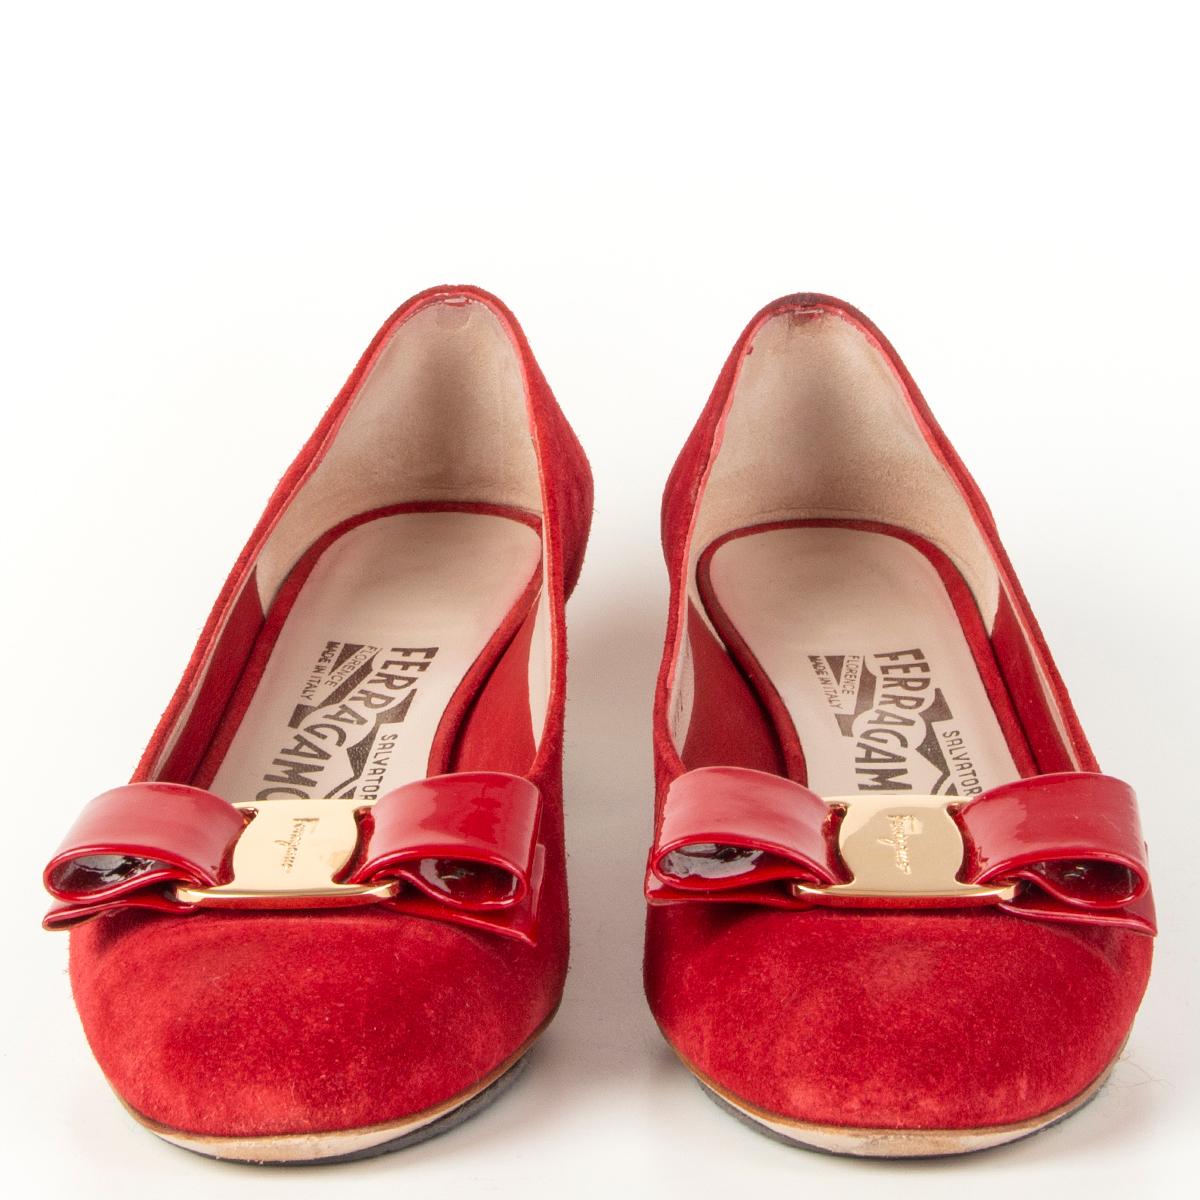 100% authentic Salvatorre Ferragamo 'Vara' low-heel pumps in red suede leather with signature patent leather bow and heel. Have been worn and are in excellent condition.

Measurements
Imprinted Size	36 (run large)
Shoe Size	36.5
Inside Sole	23.5cm